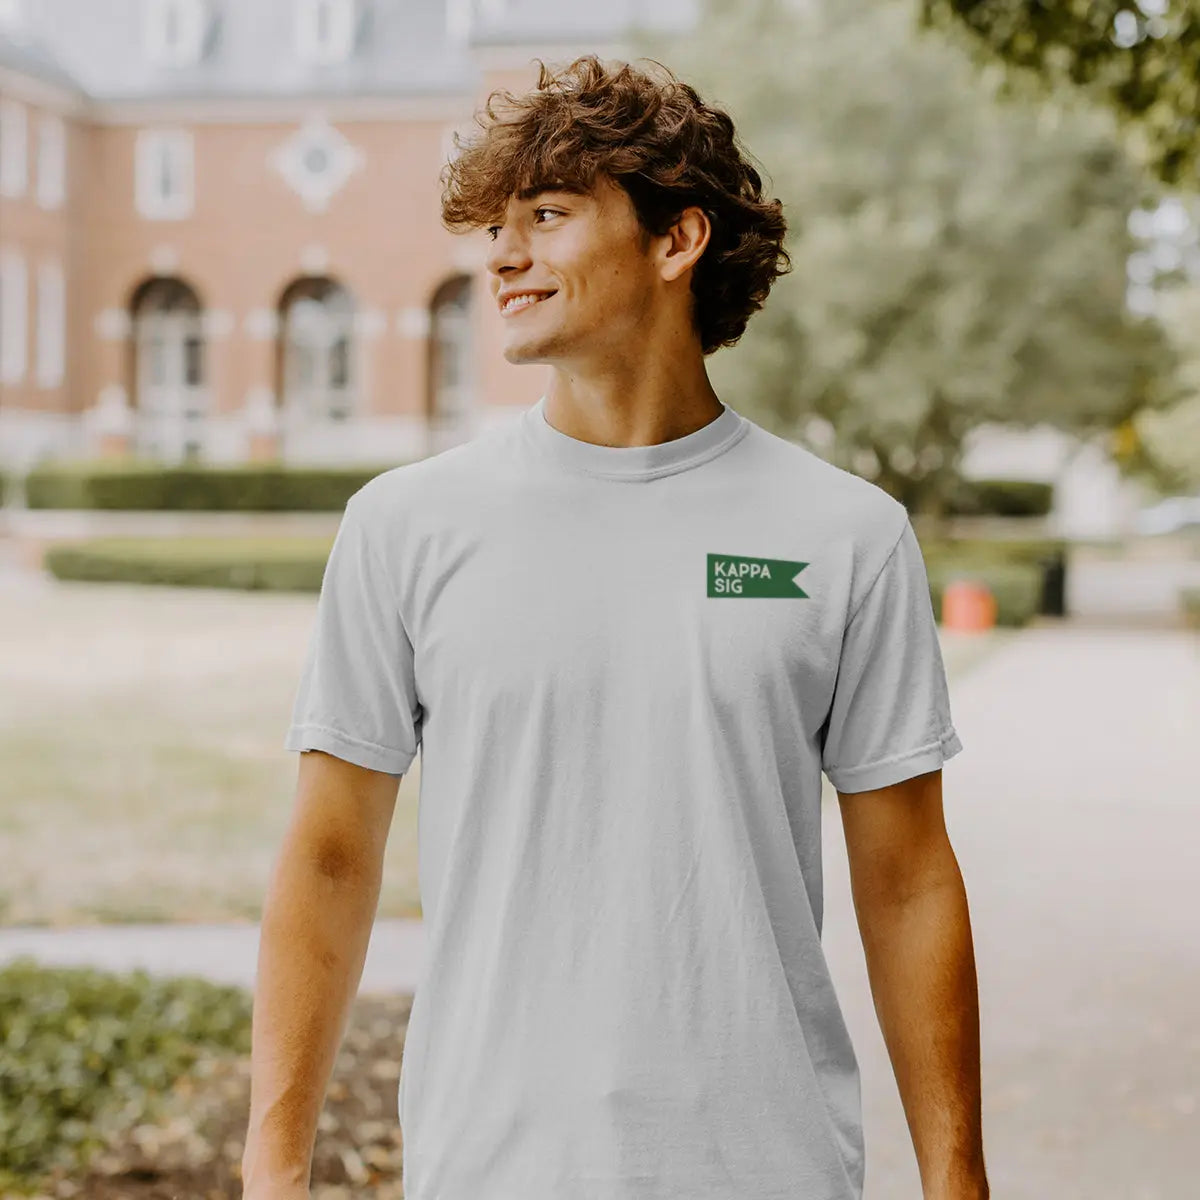 Kappa Sig Comfort Colors Happy Earth White Short Sleeve Tee - Kappa Sigma Official Store